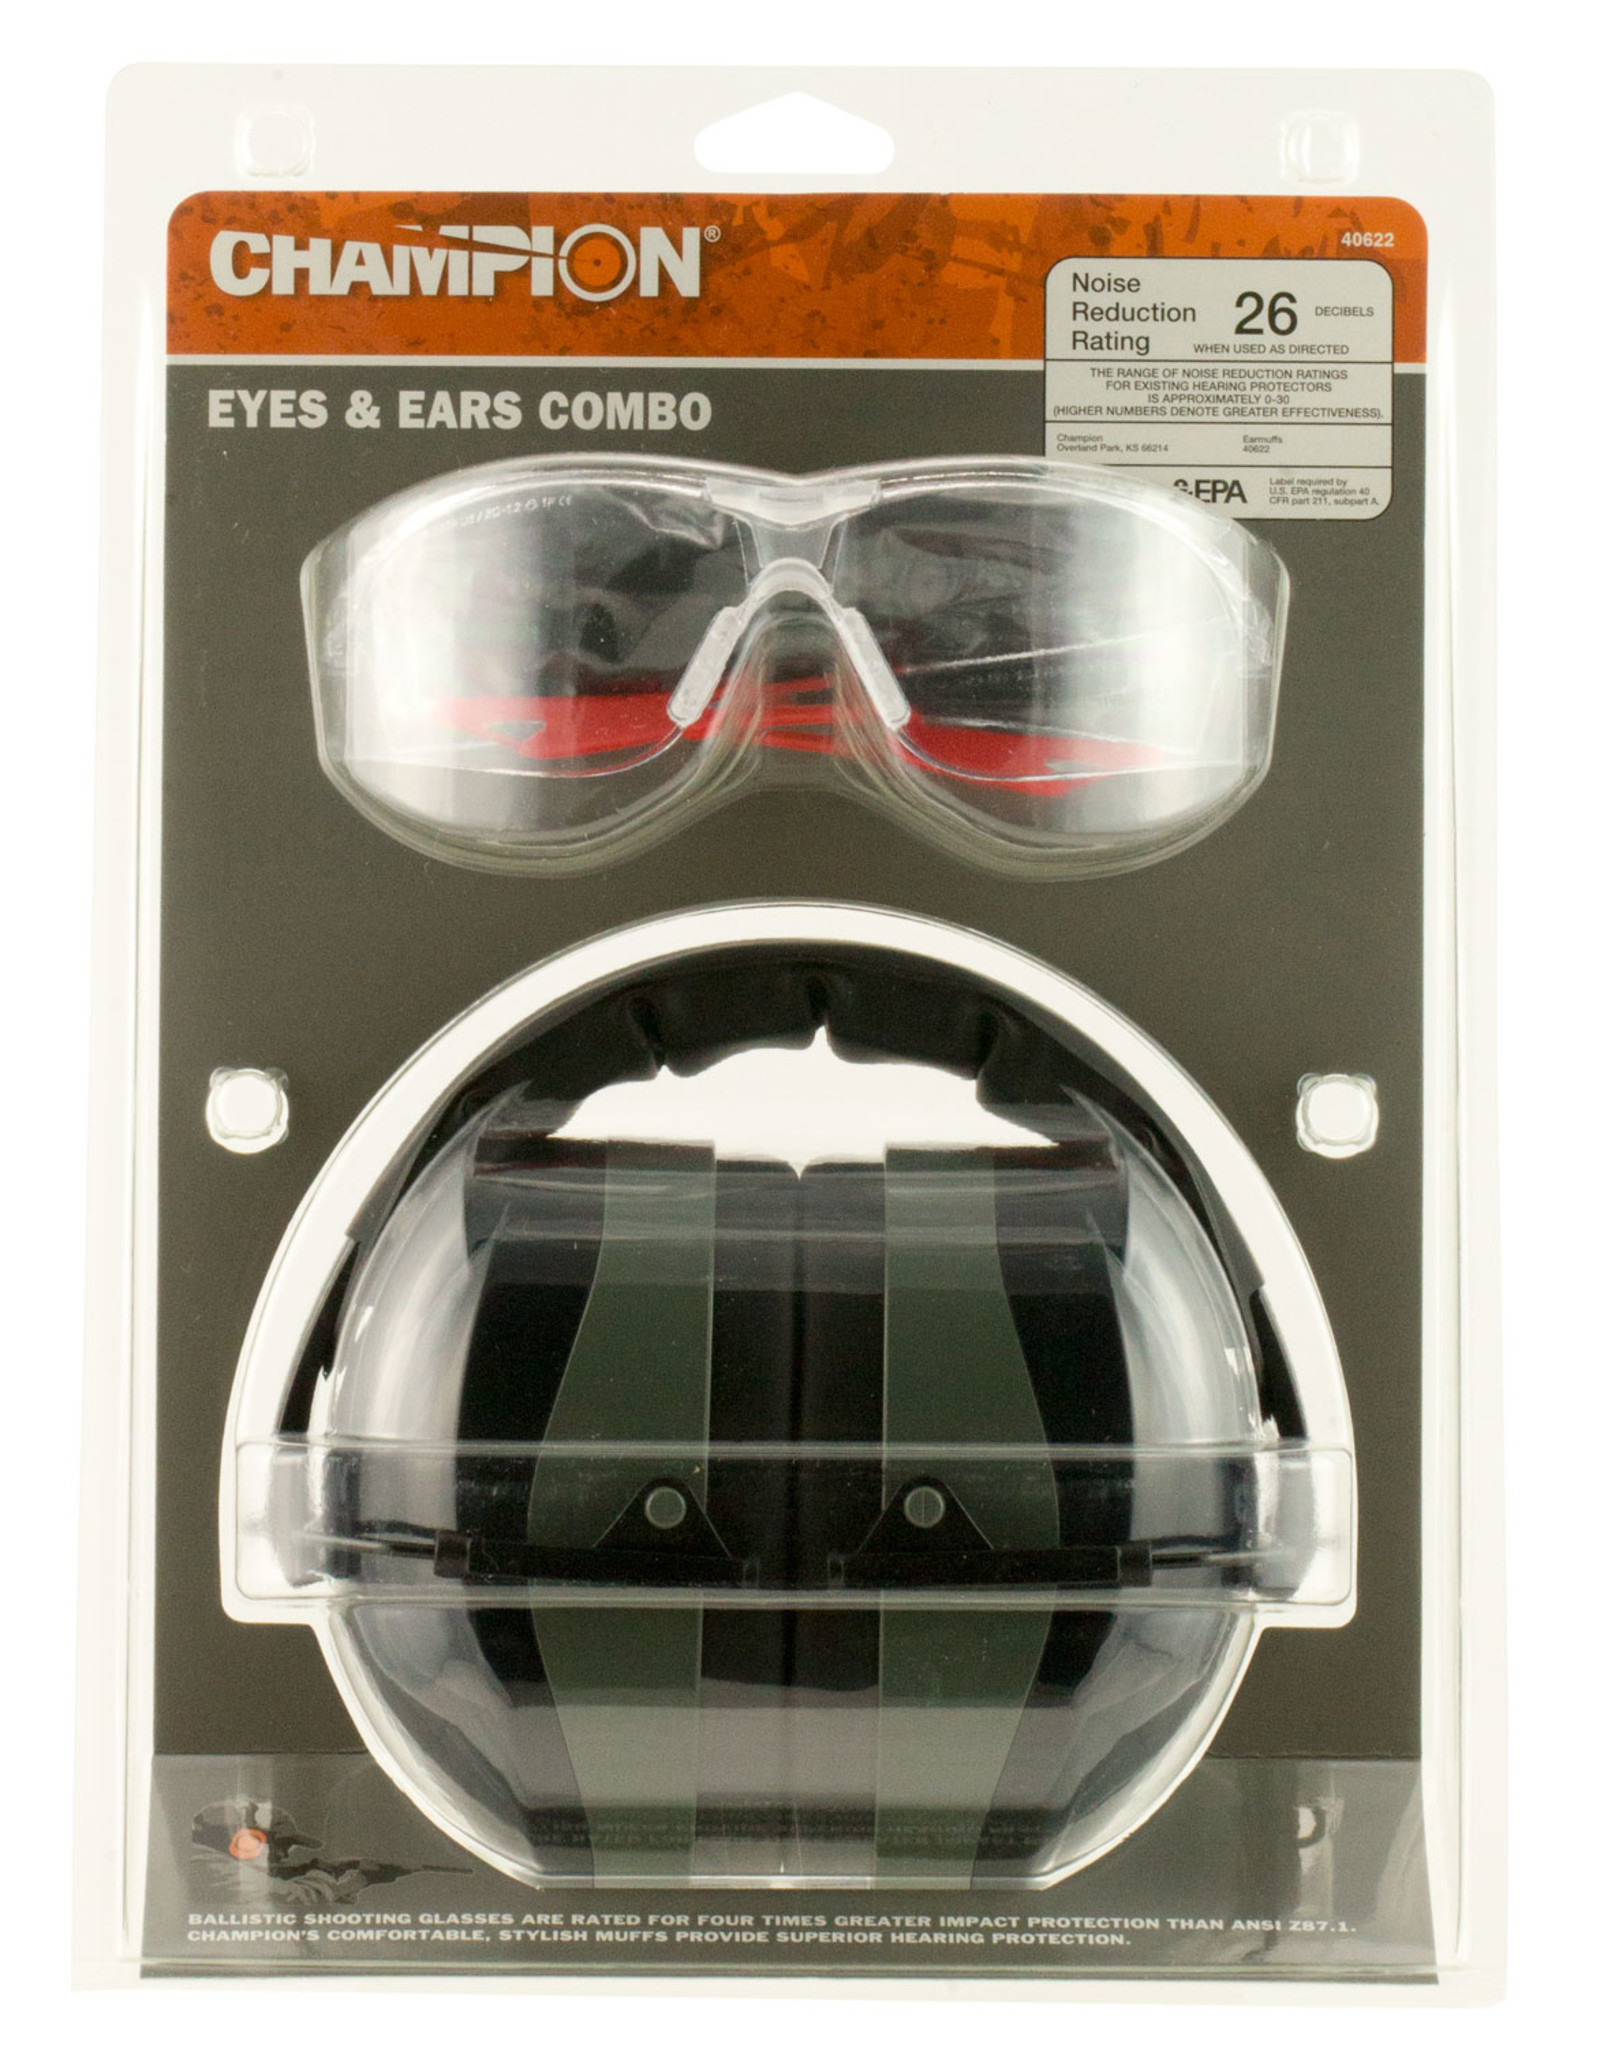 CHAMPION Champion Eyes & Ears Combo Passive Hearing Protection - NRR 26